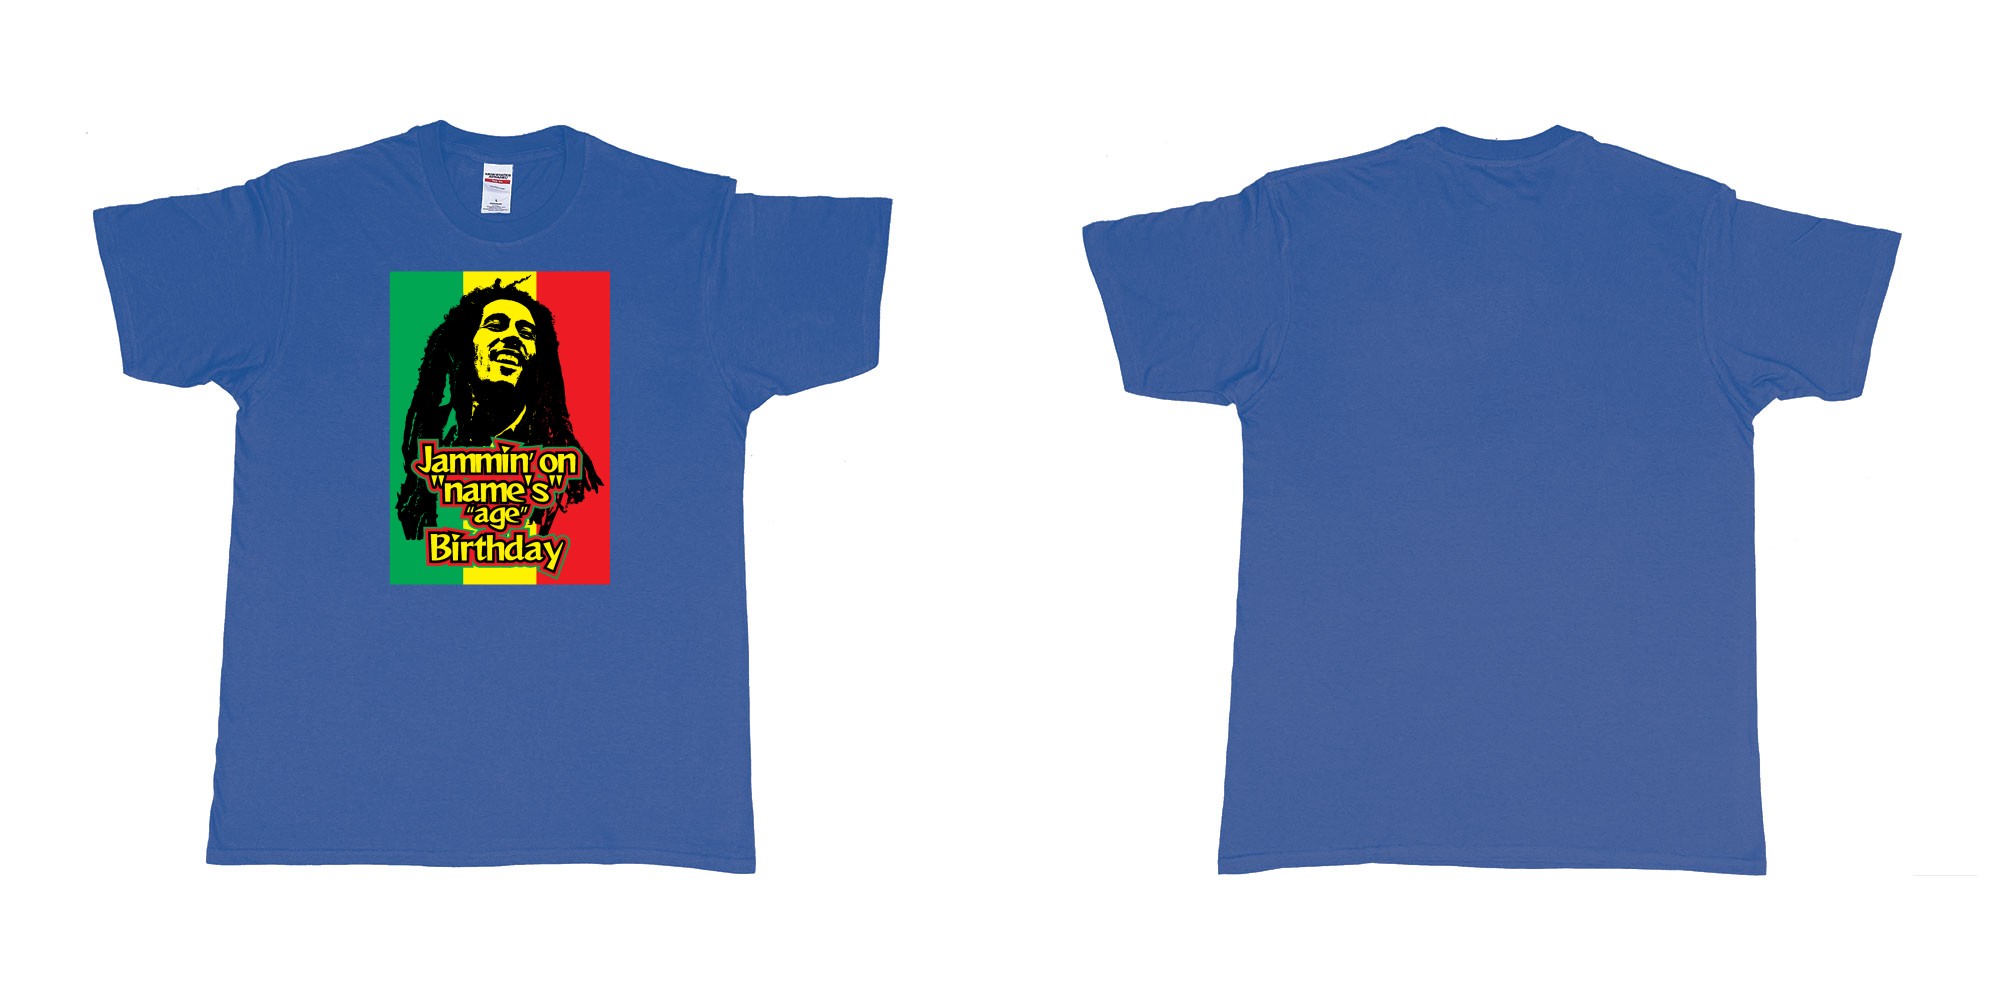 Custom tshirt design bob marley jammin on custom names birthday in fabric color royal-blue choice your own text made in Bali by The Pirate Way